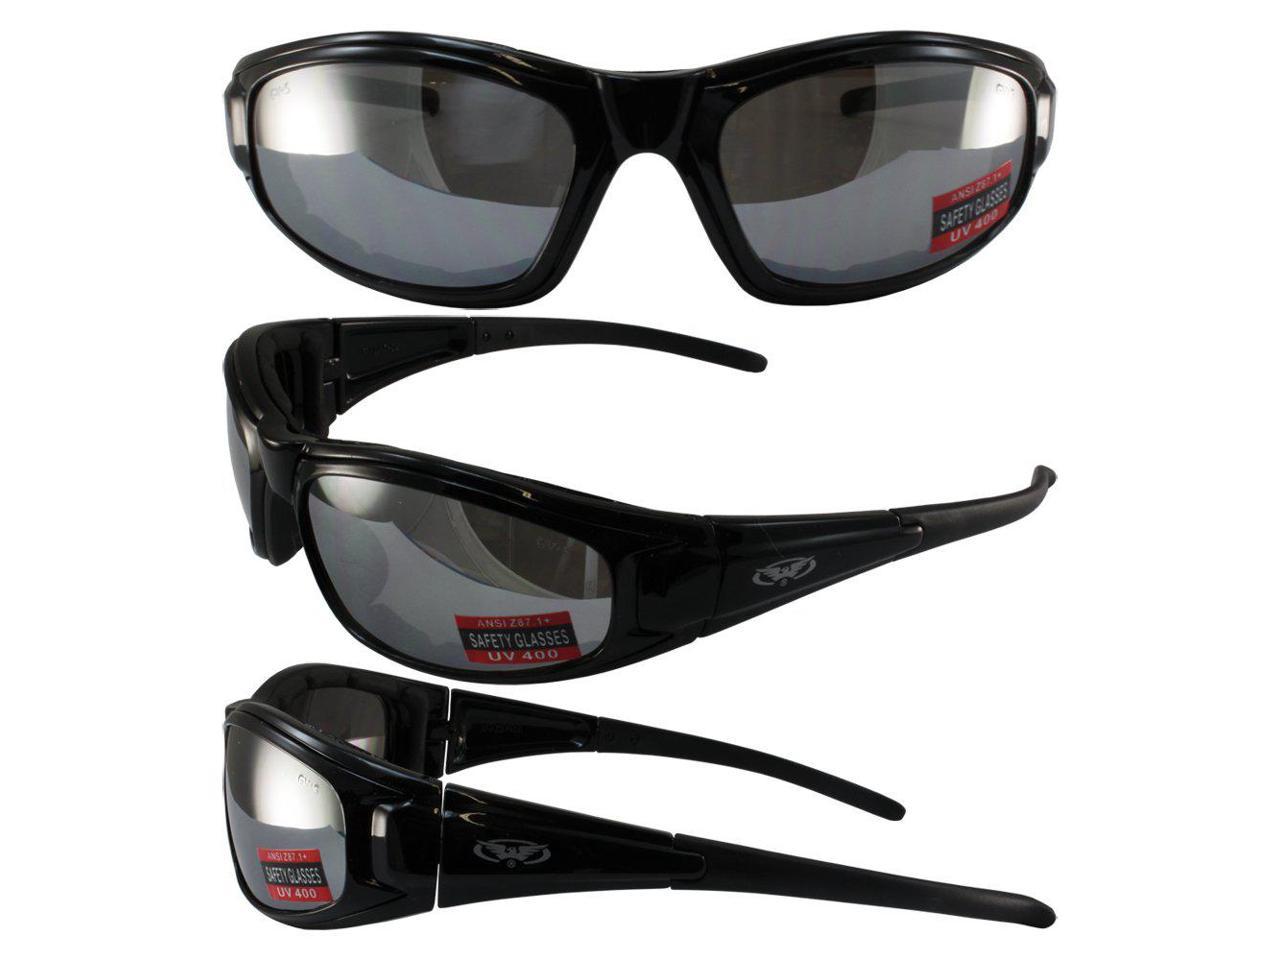 Global Vision Triumphant 1 Padded Motorcycle Sunglasses Gloss Red Frames Flash Mirror Lenses ANSI Z87+ 